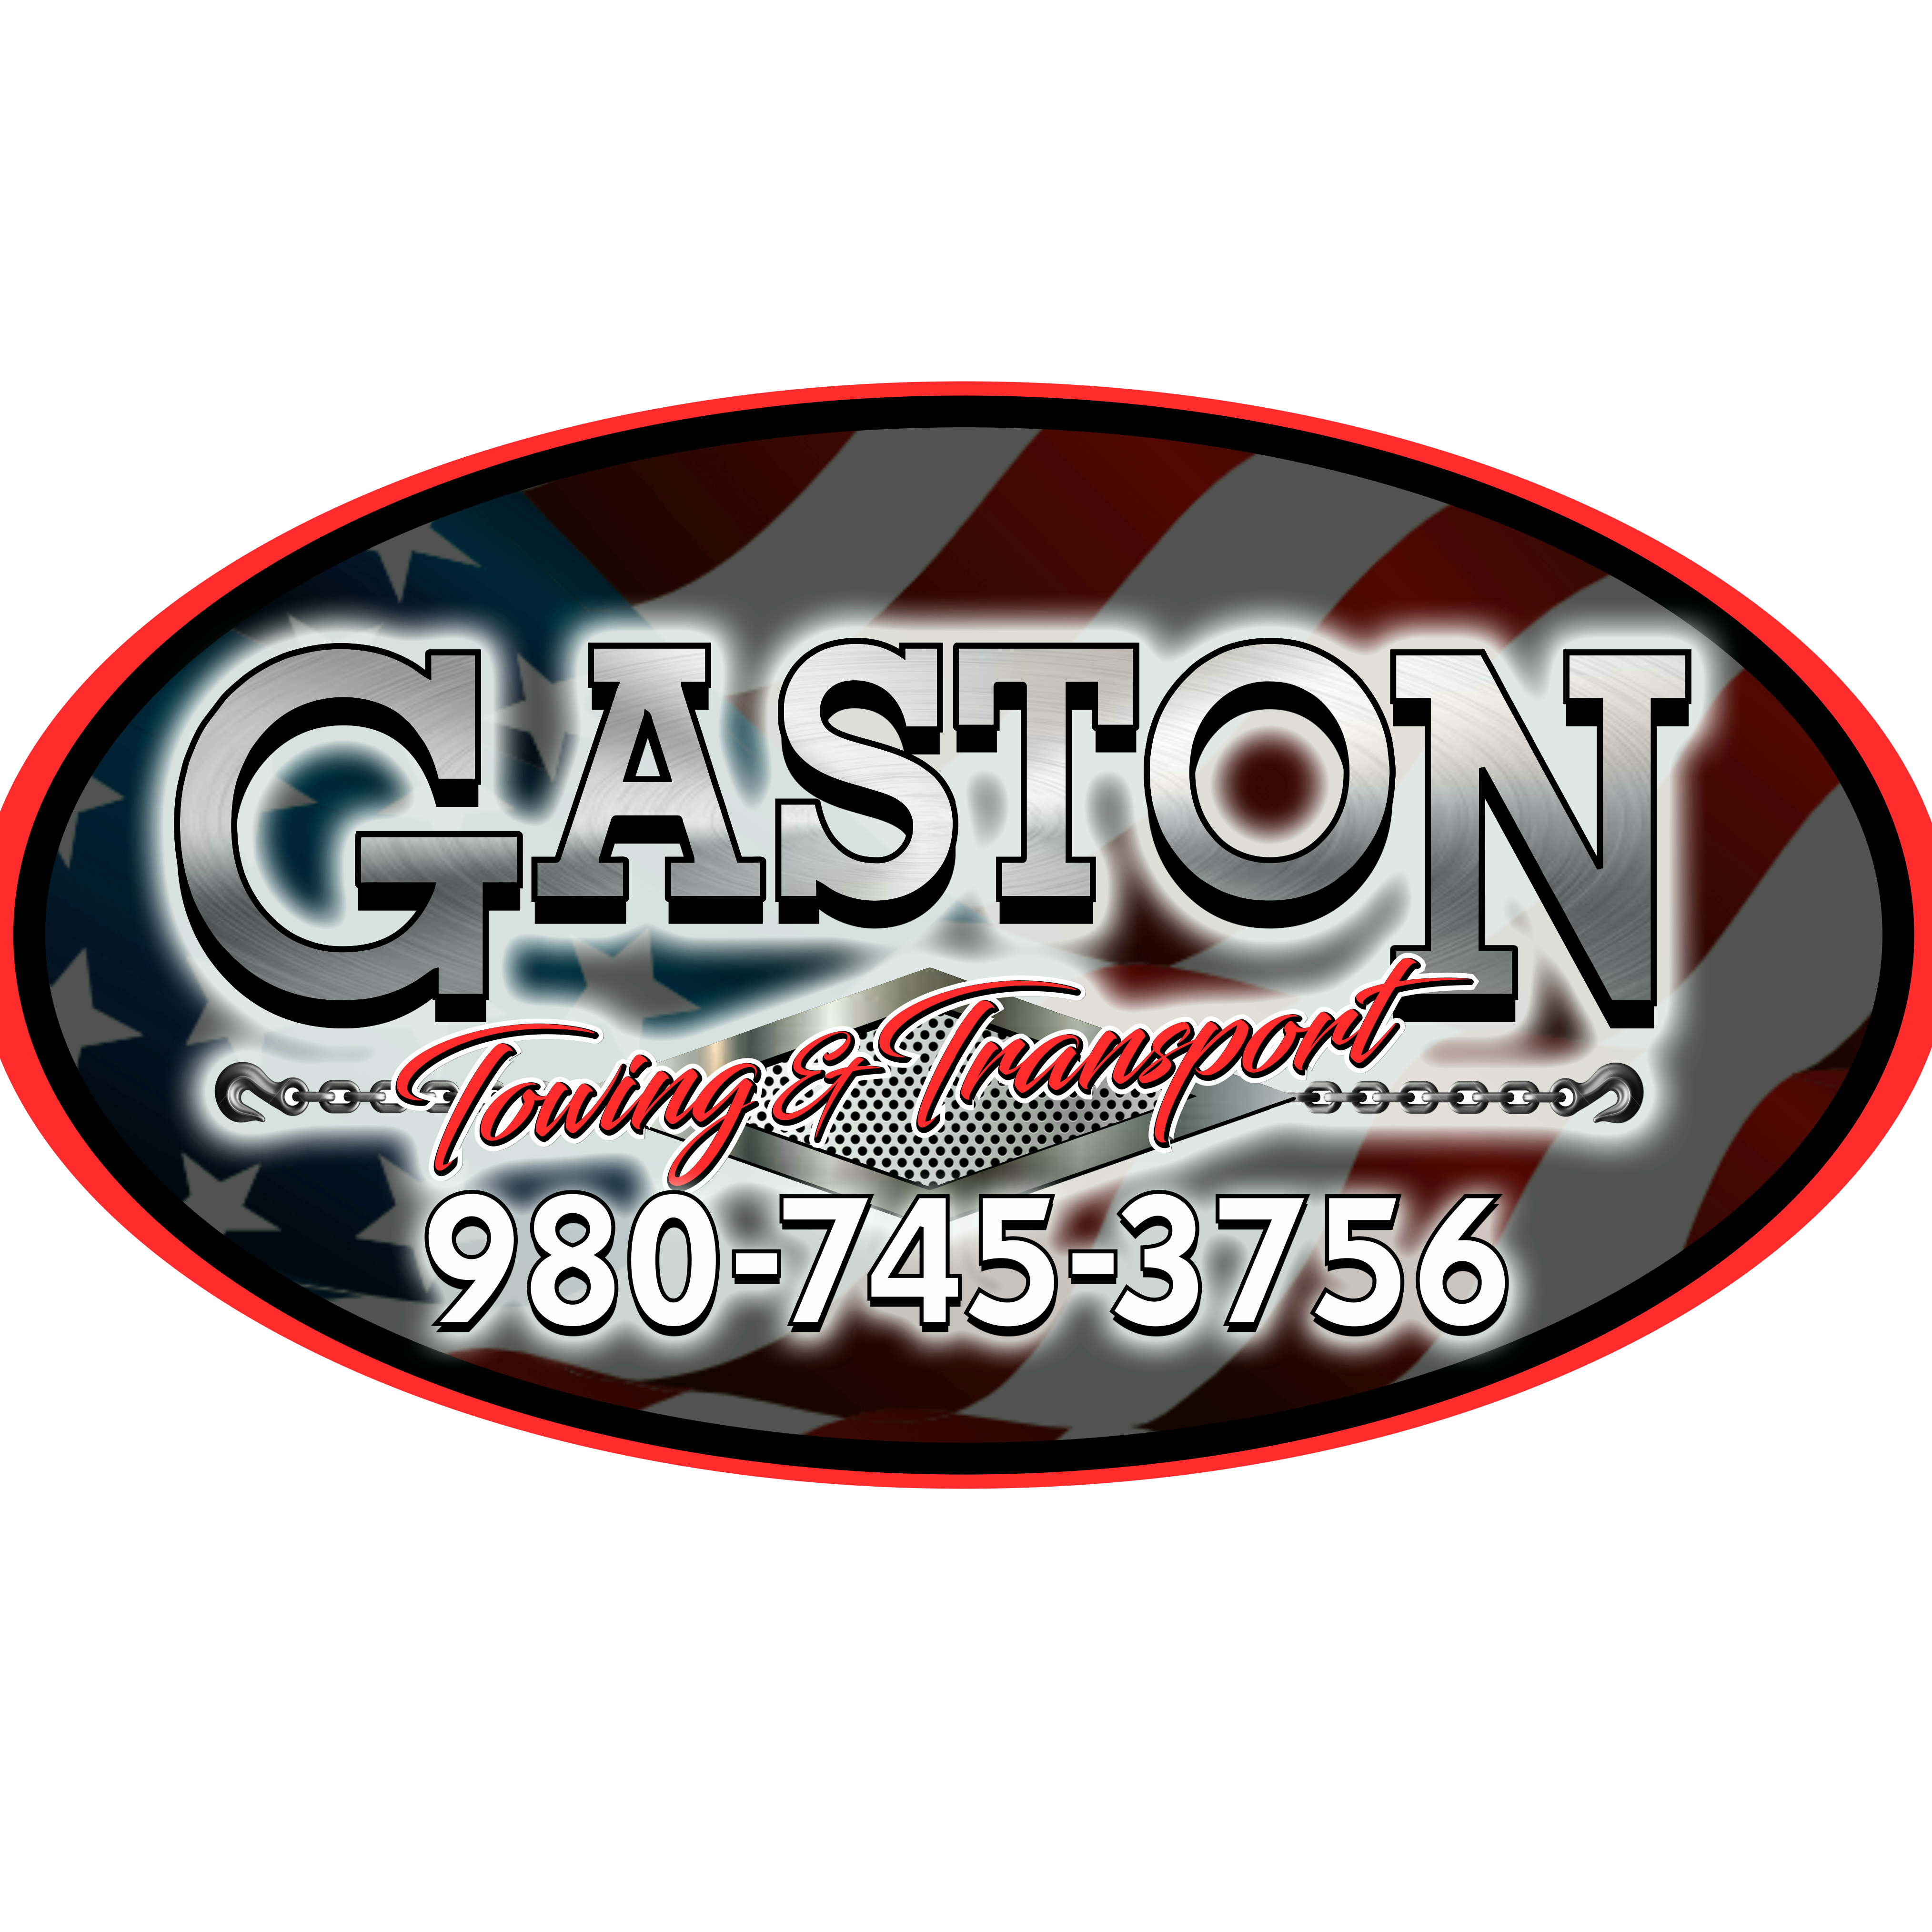 Gaston Towing and Transport